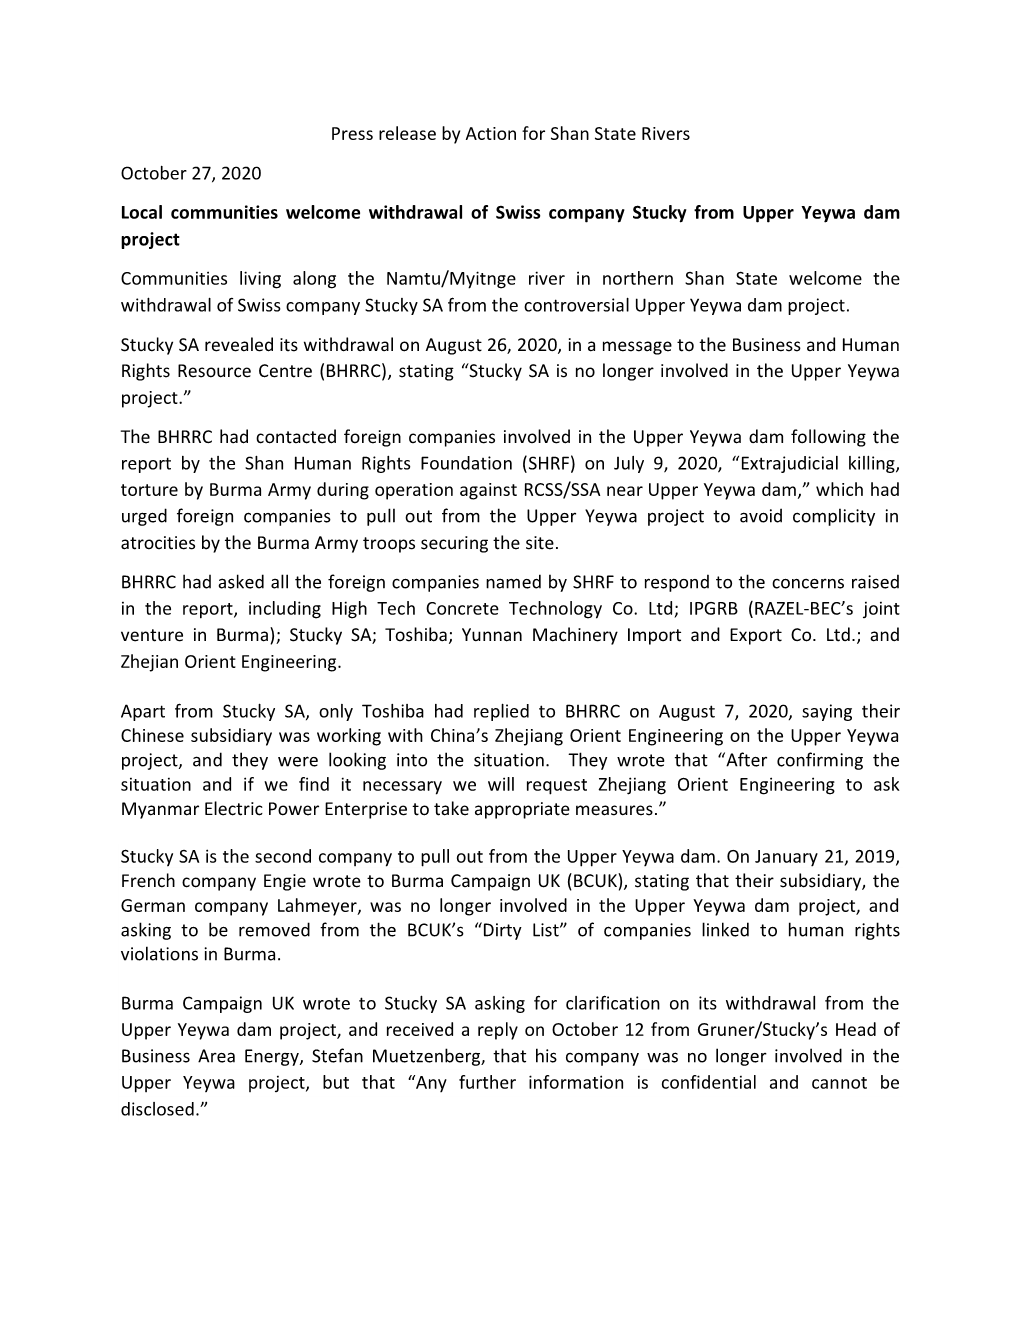 Press Release by Action for Shan State Rivers October 27, 2020 Local